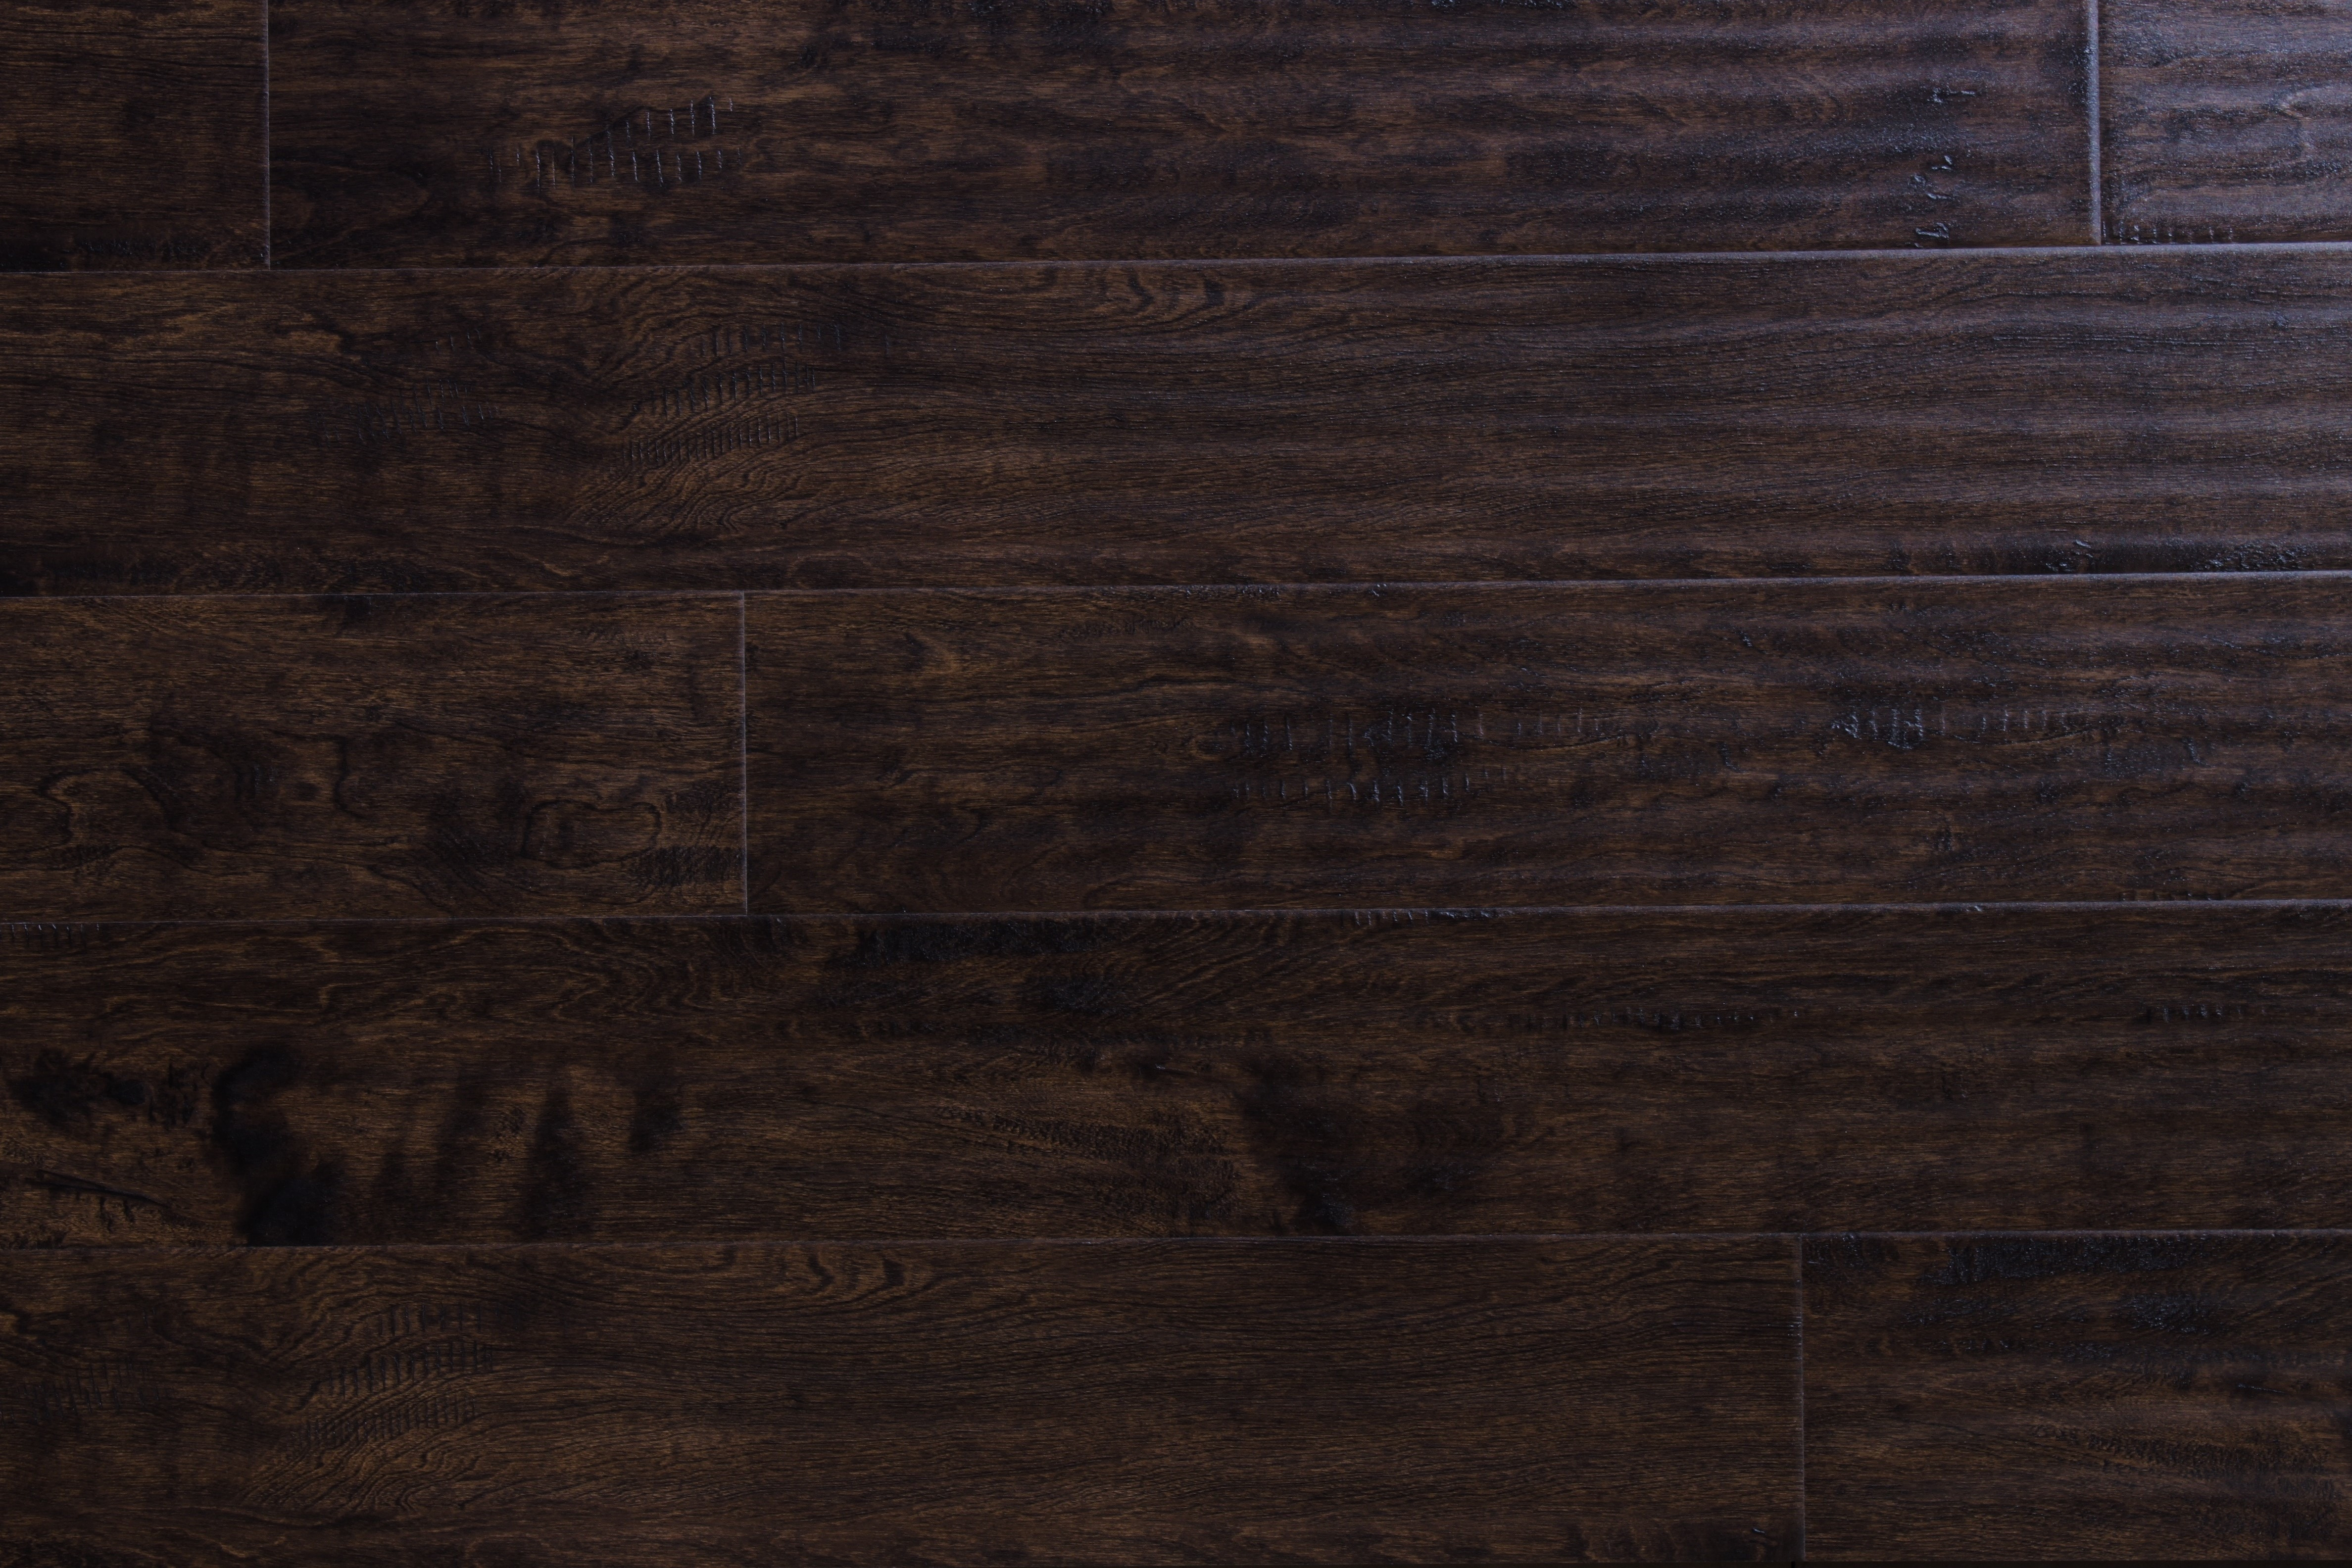 22 Lovable Hand Scraped Hardwood Flooring Reviews 2024 free download hand scraped hardwood flooring reviews of wood flooring free samples available at builddirecta within tailor multi gb 5874277bb8d3c